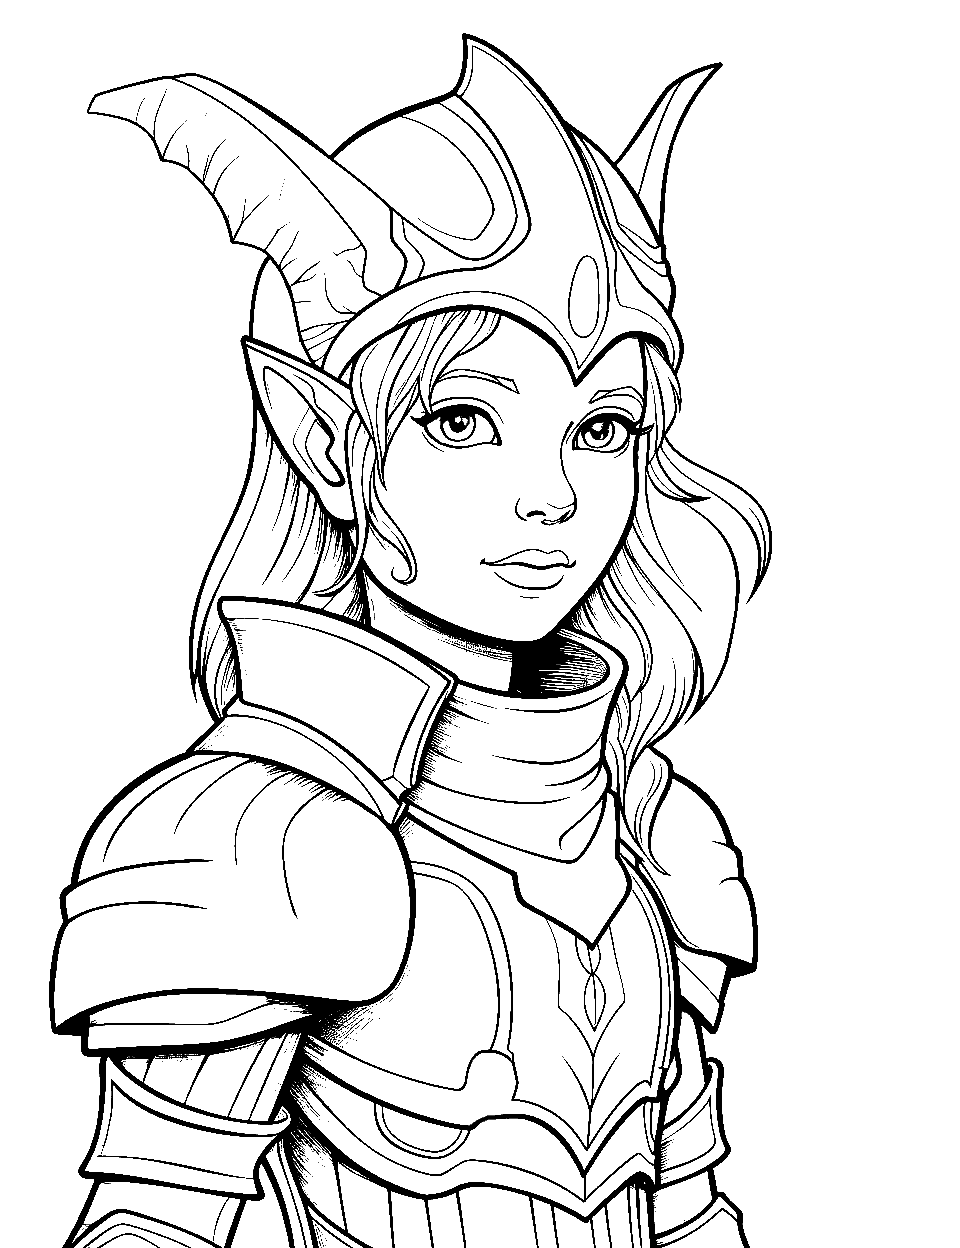 Realistic Elf Warrior in Armor Coloring Page - A detailed, realistic depiction of an elf warrior in battle armor.